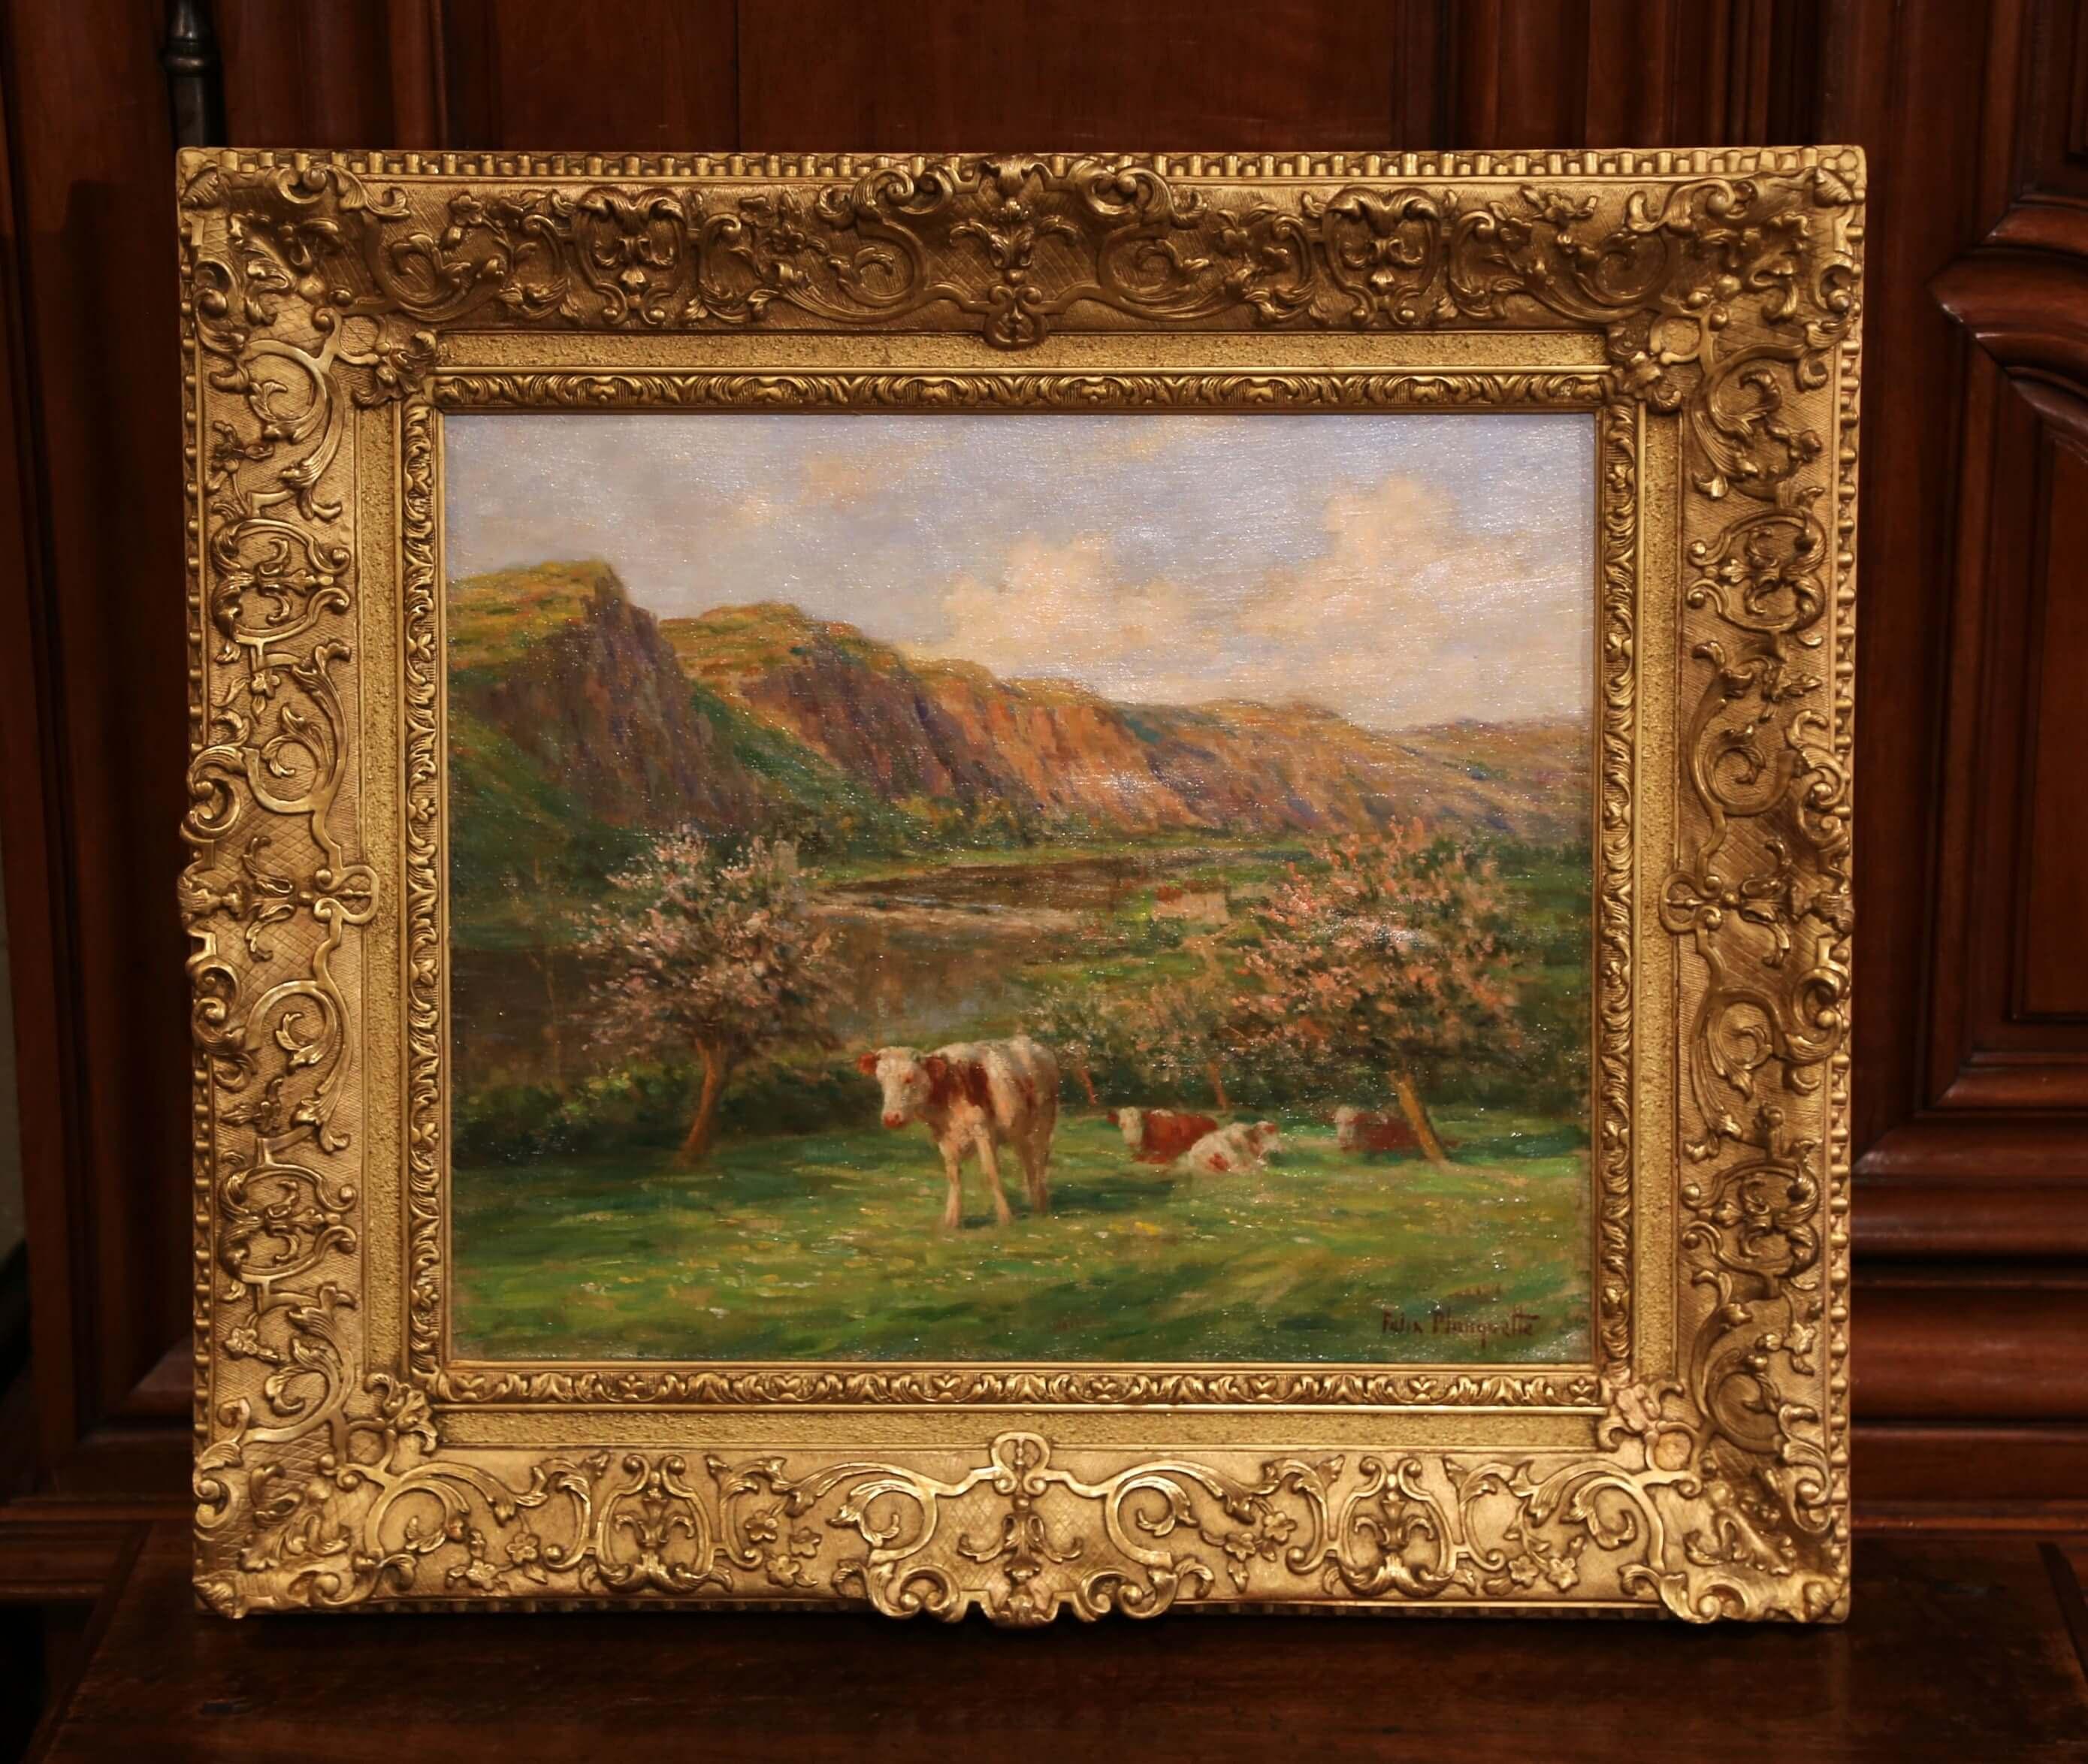 Canvas Early 20th Century French Cow Painting in Giltwood Frame Signed Felix Planquette